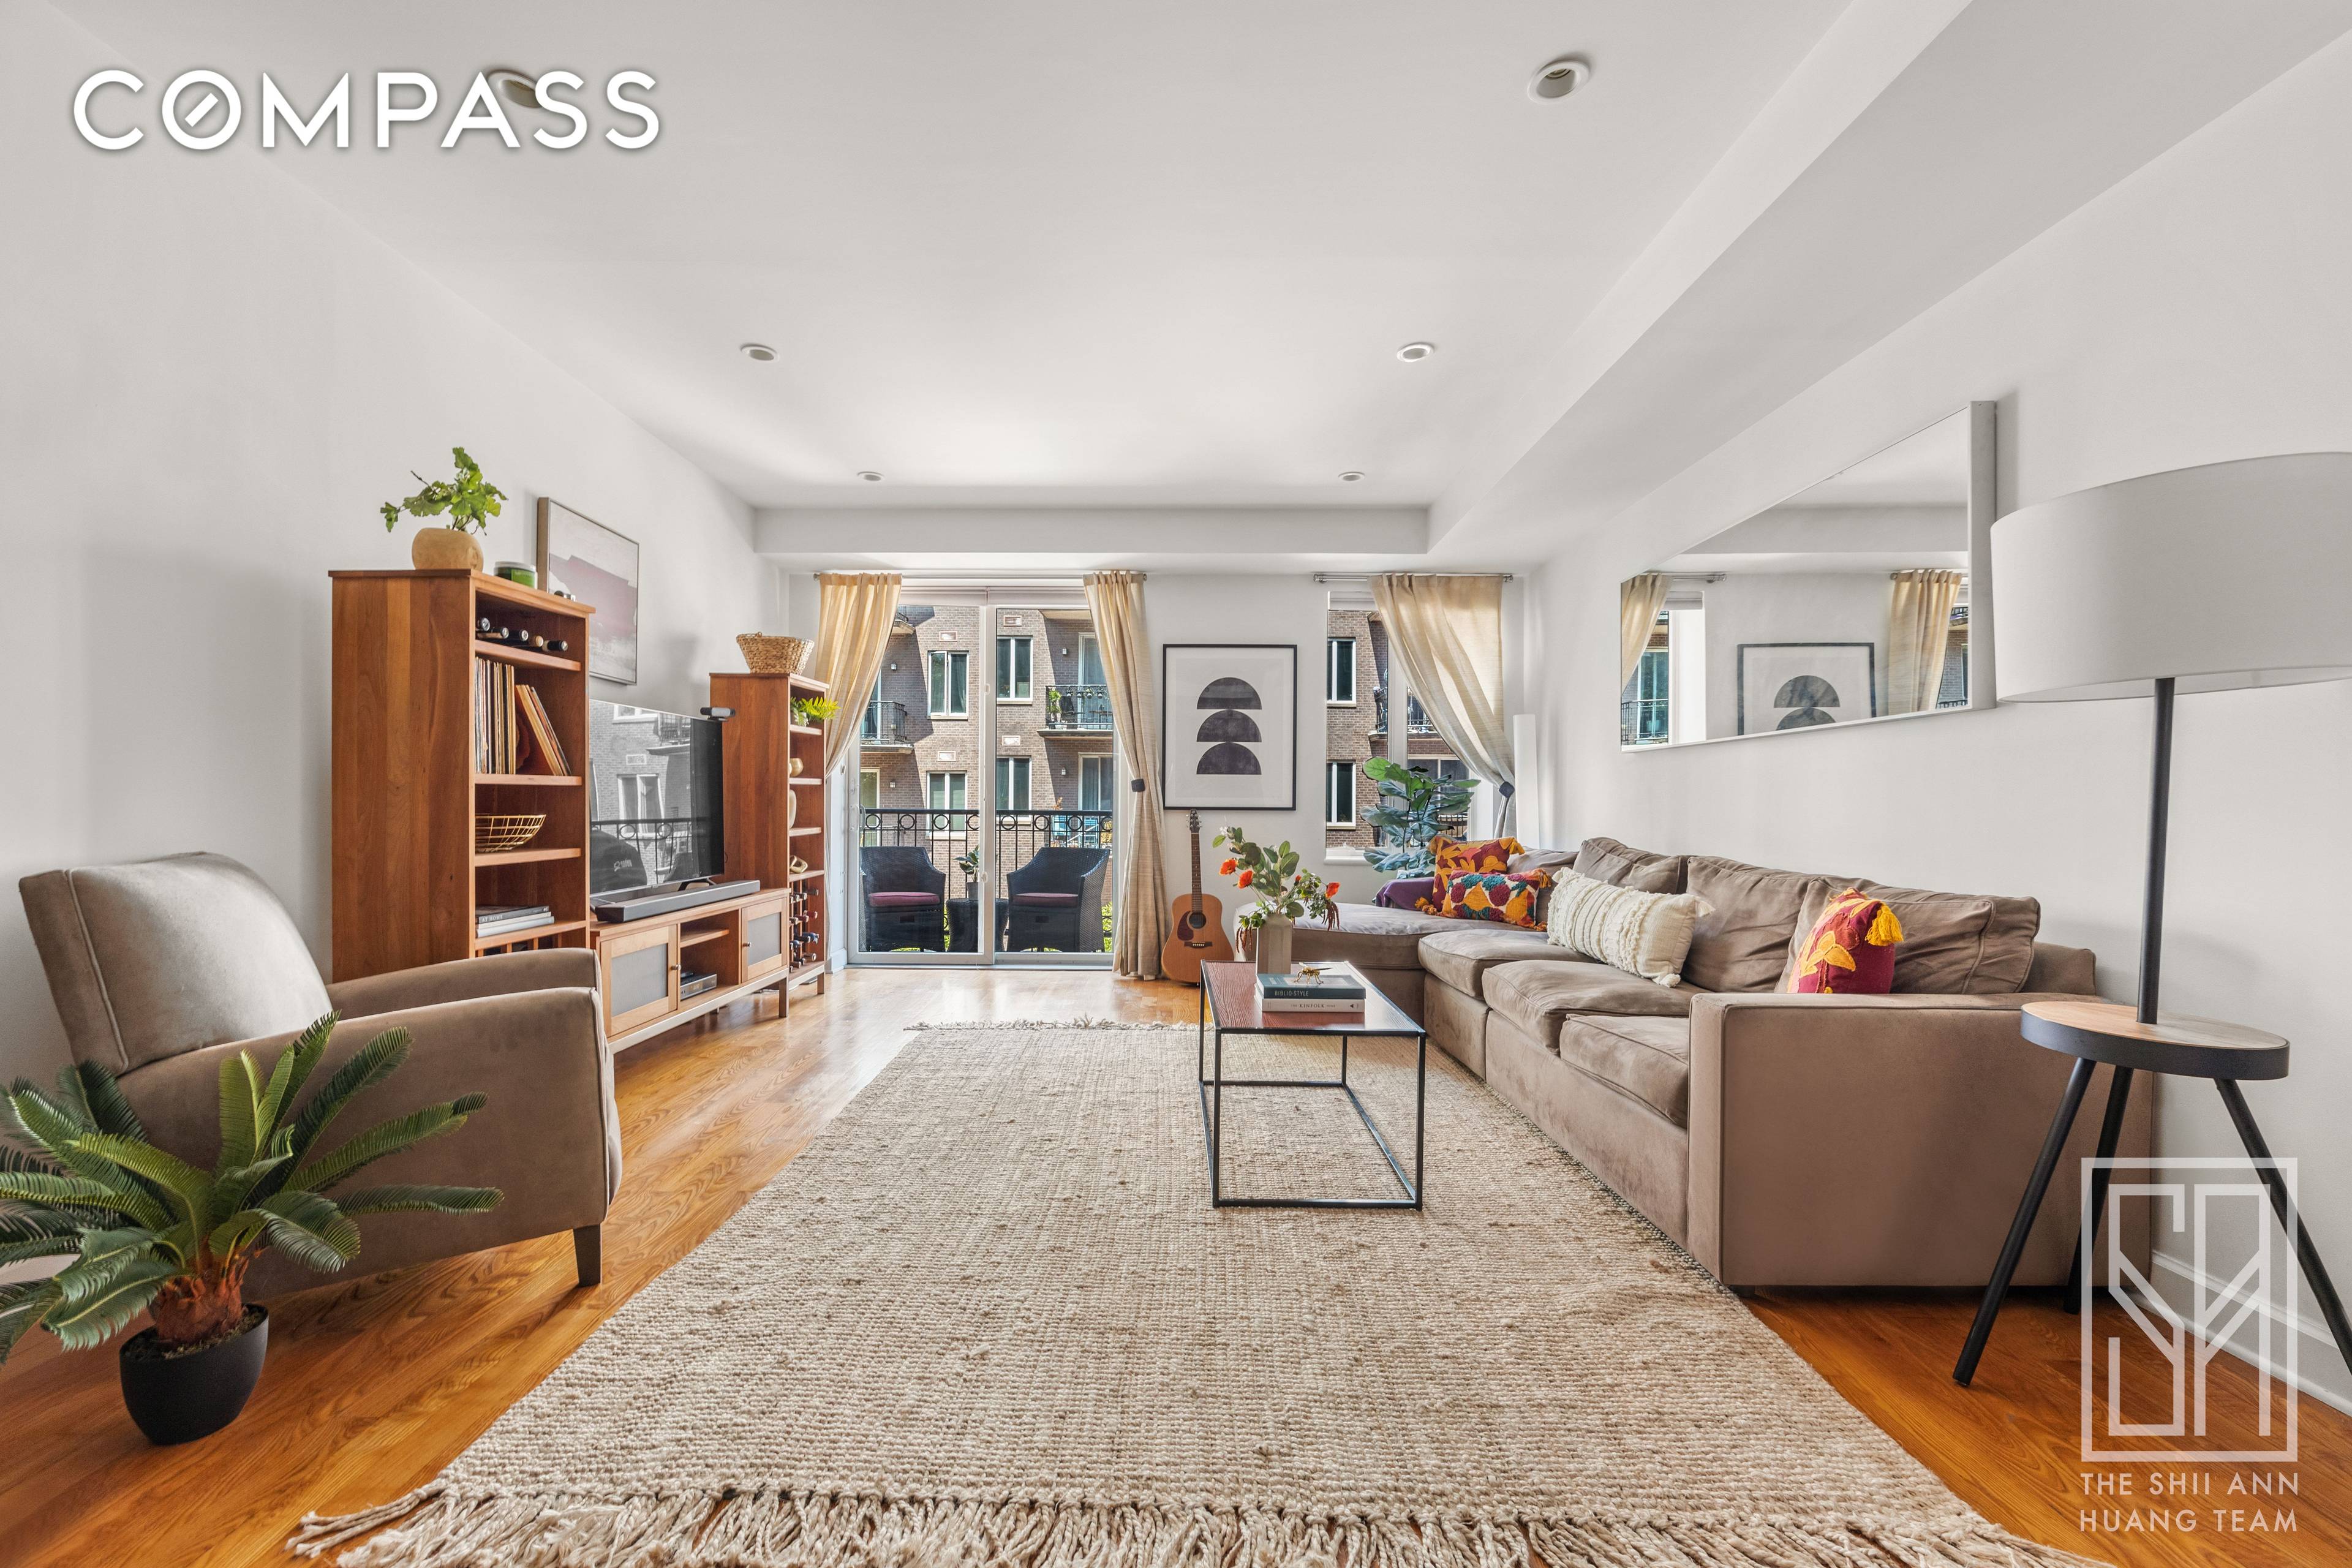 Welcome home to one of the most spacious three bedroom, two bathroom condos in Park Slope.